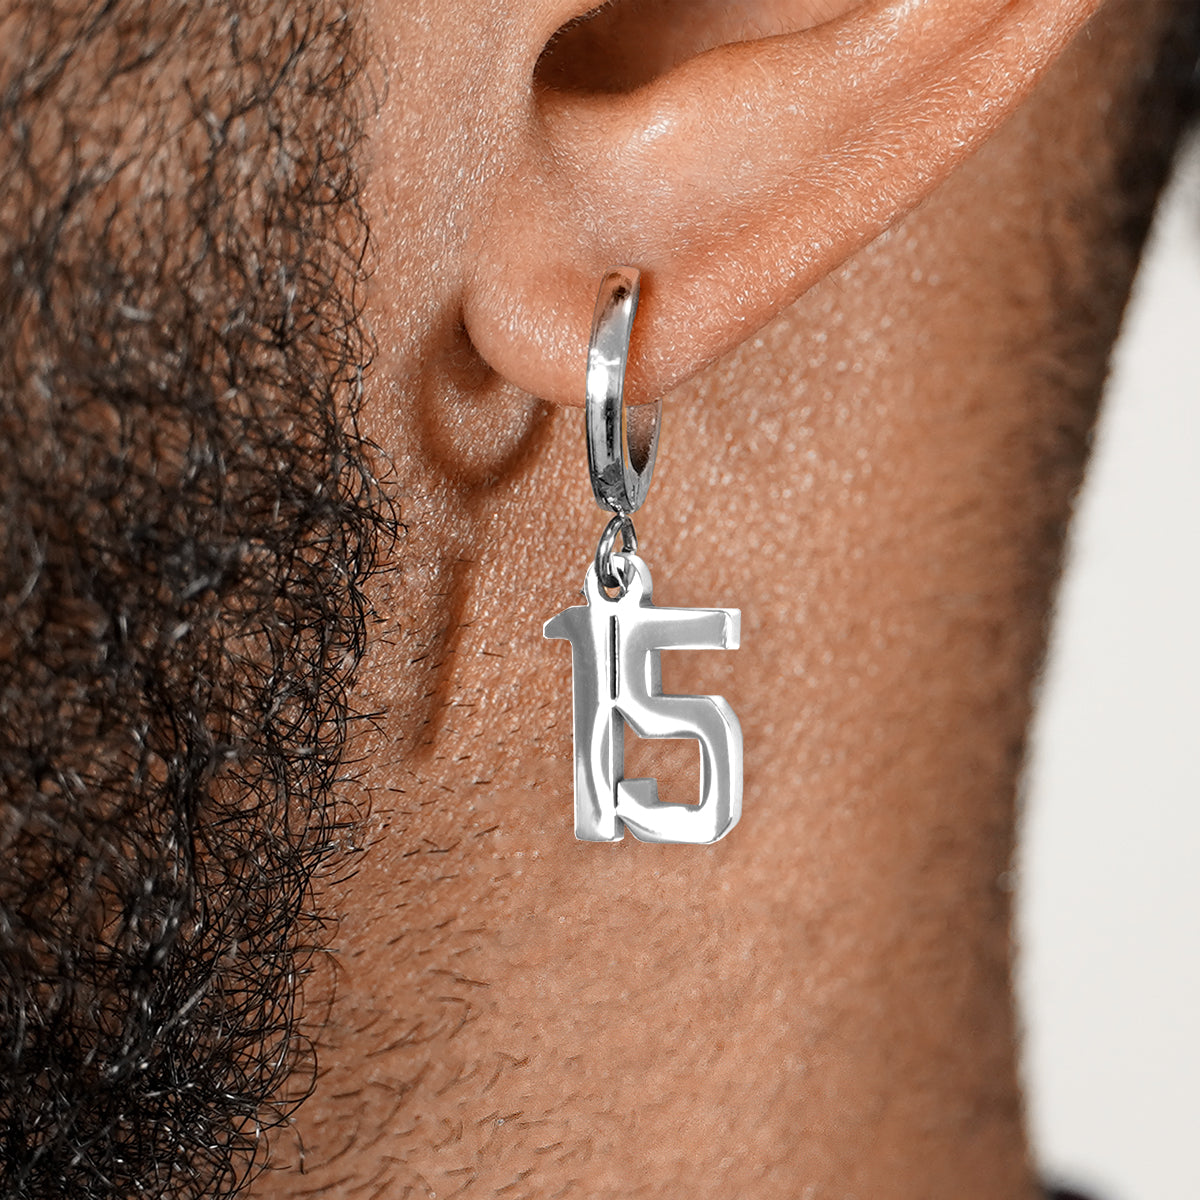 15 Number Earring - Stainless Steel